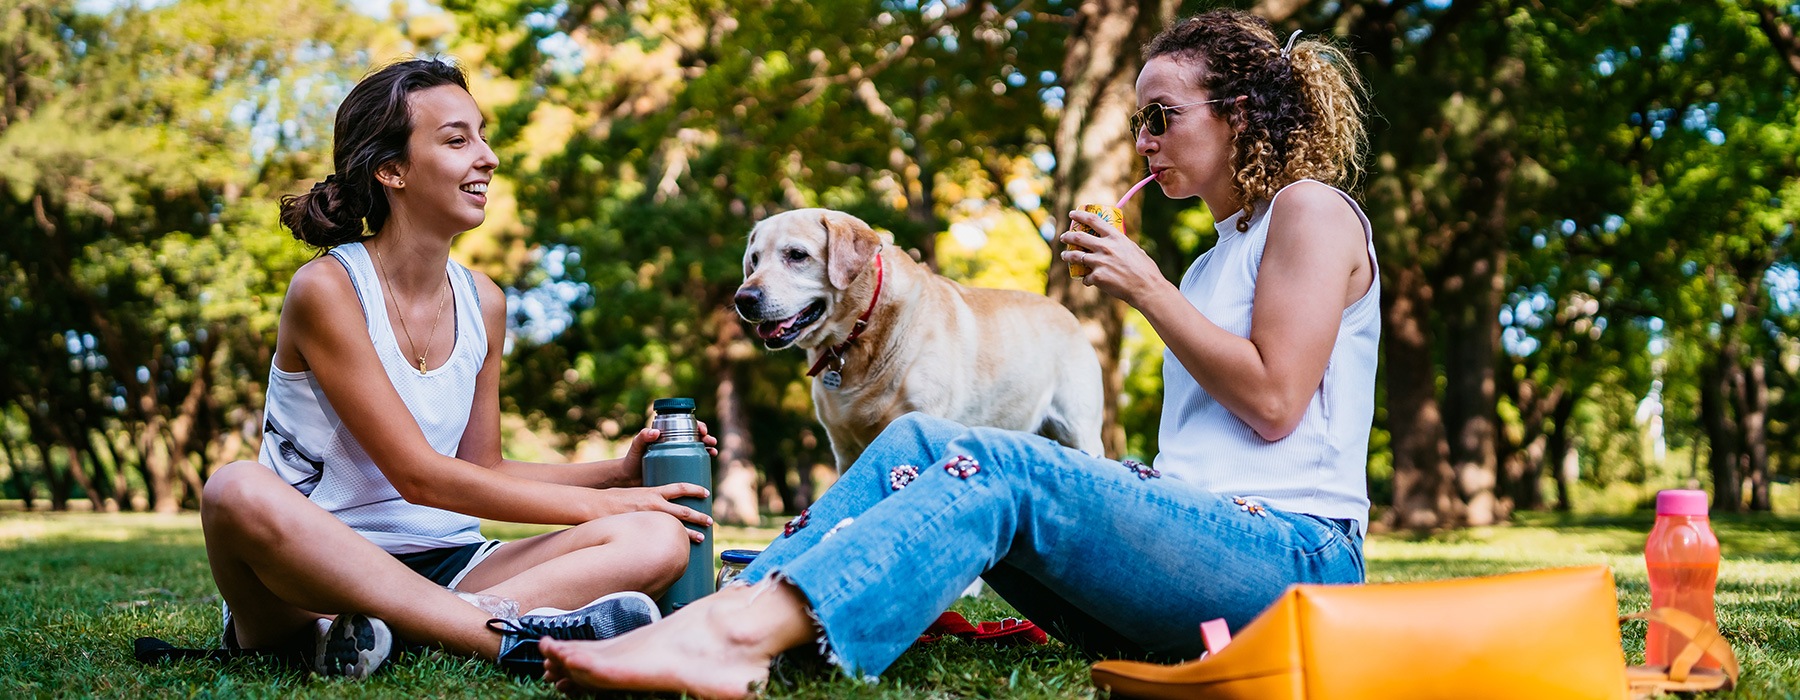 lifestyle image of two women and their dog outdoors